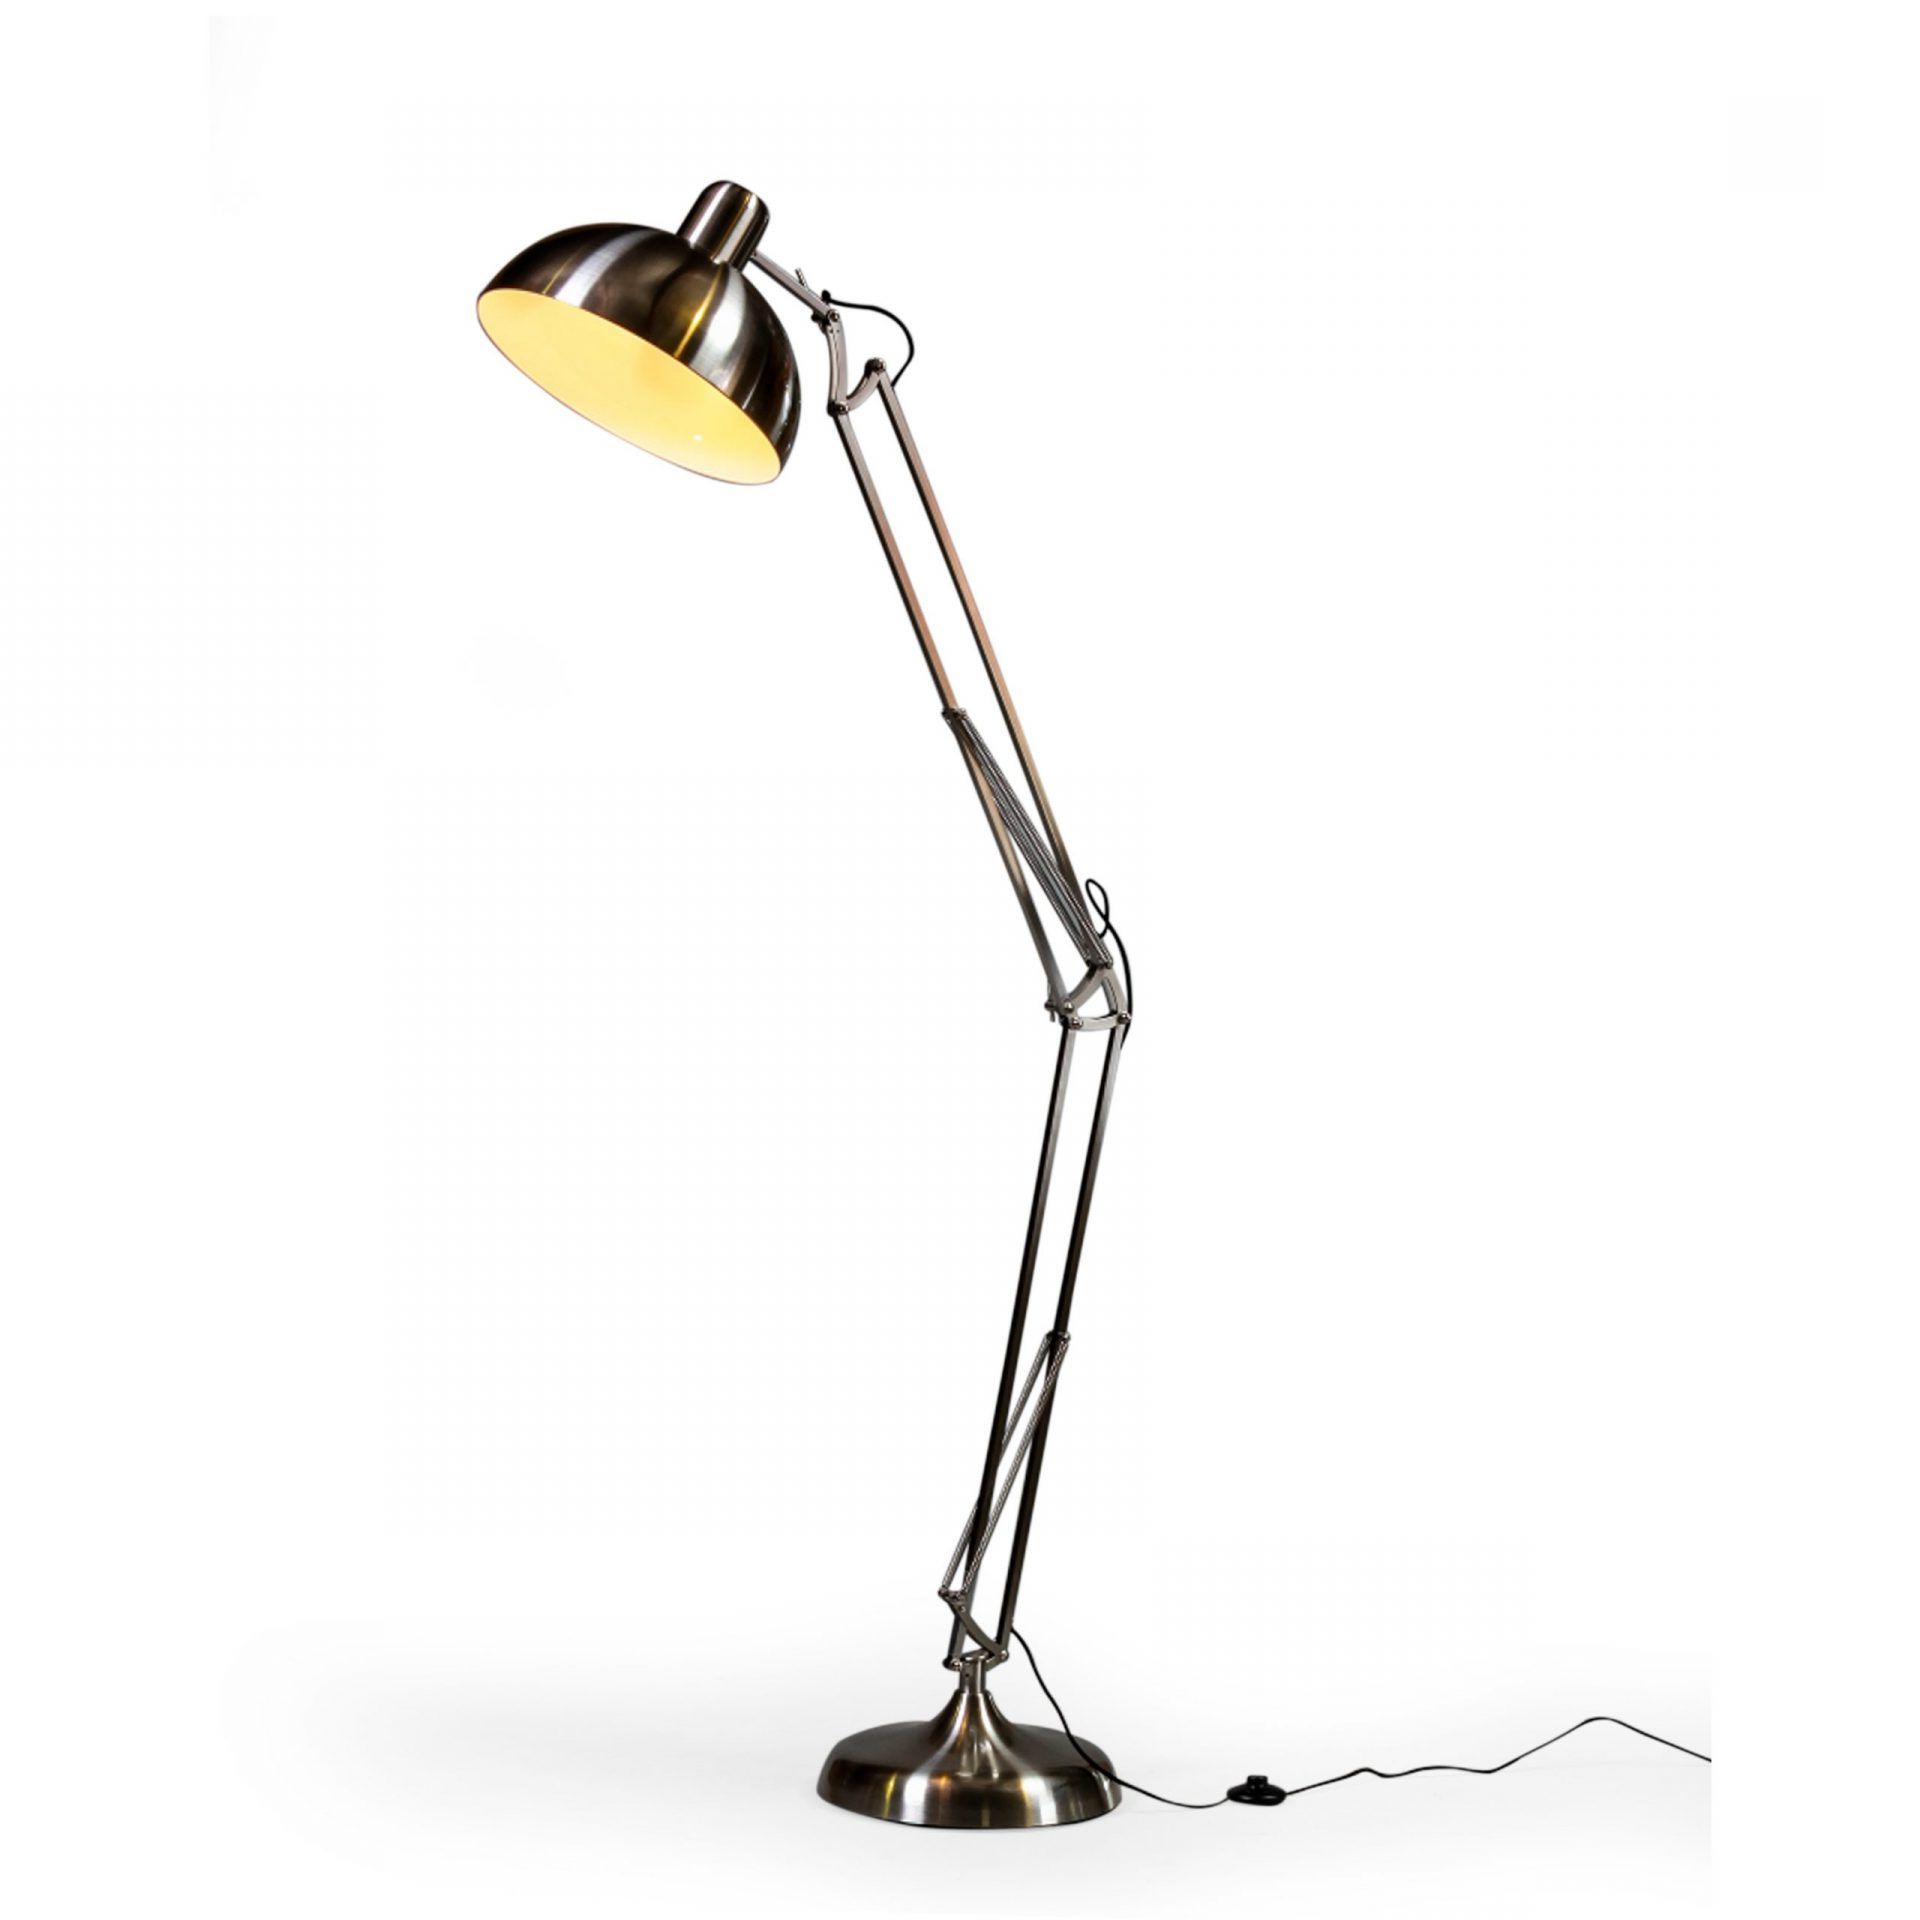 Brushed Steel Floor Lamp Angle Large Industrial Light Stylish Retro Poise For Brushed Steel Floor Lamps (Gallery 19 of 20)